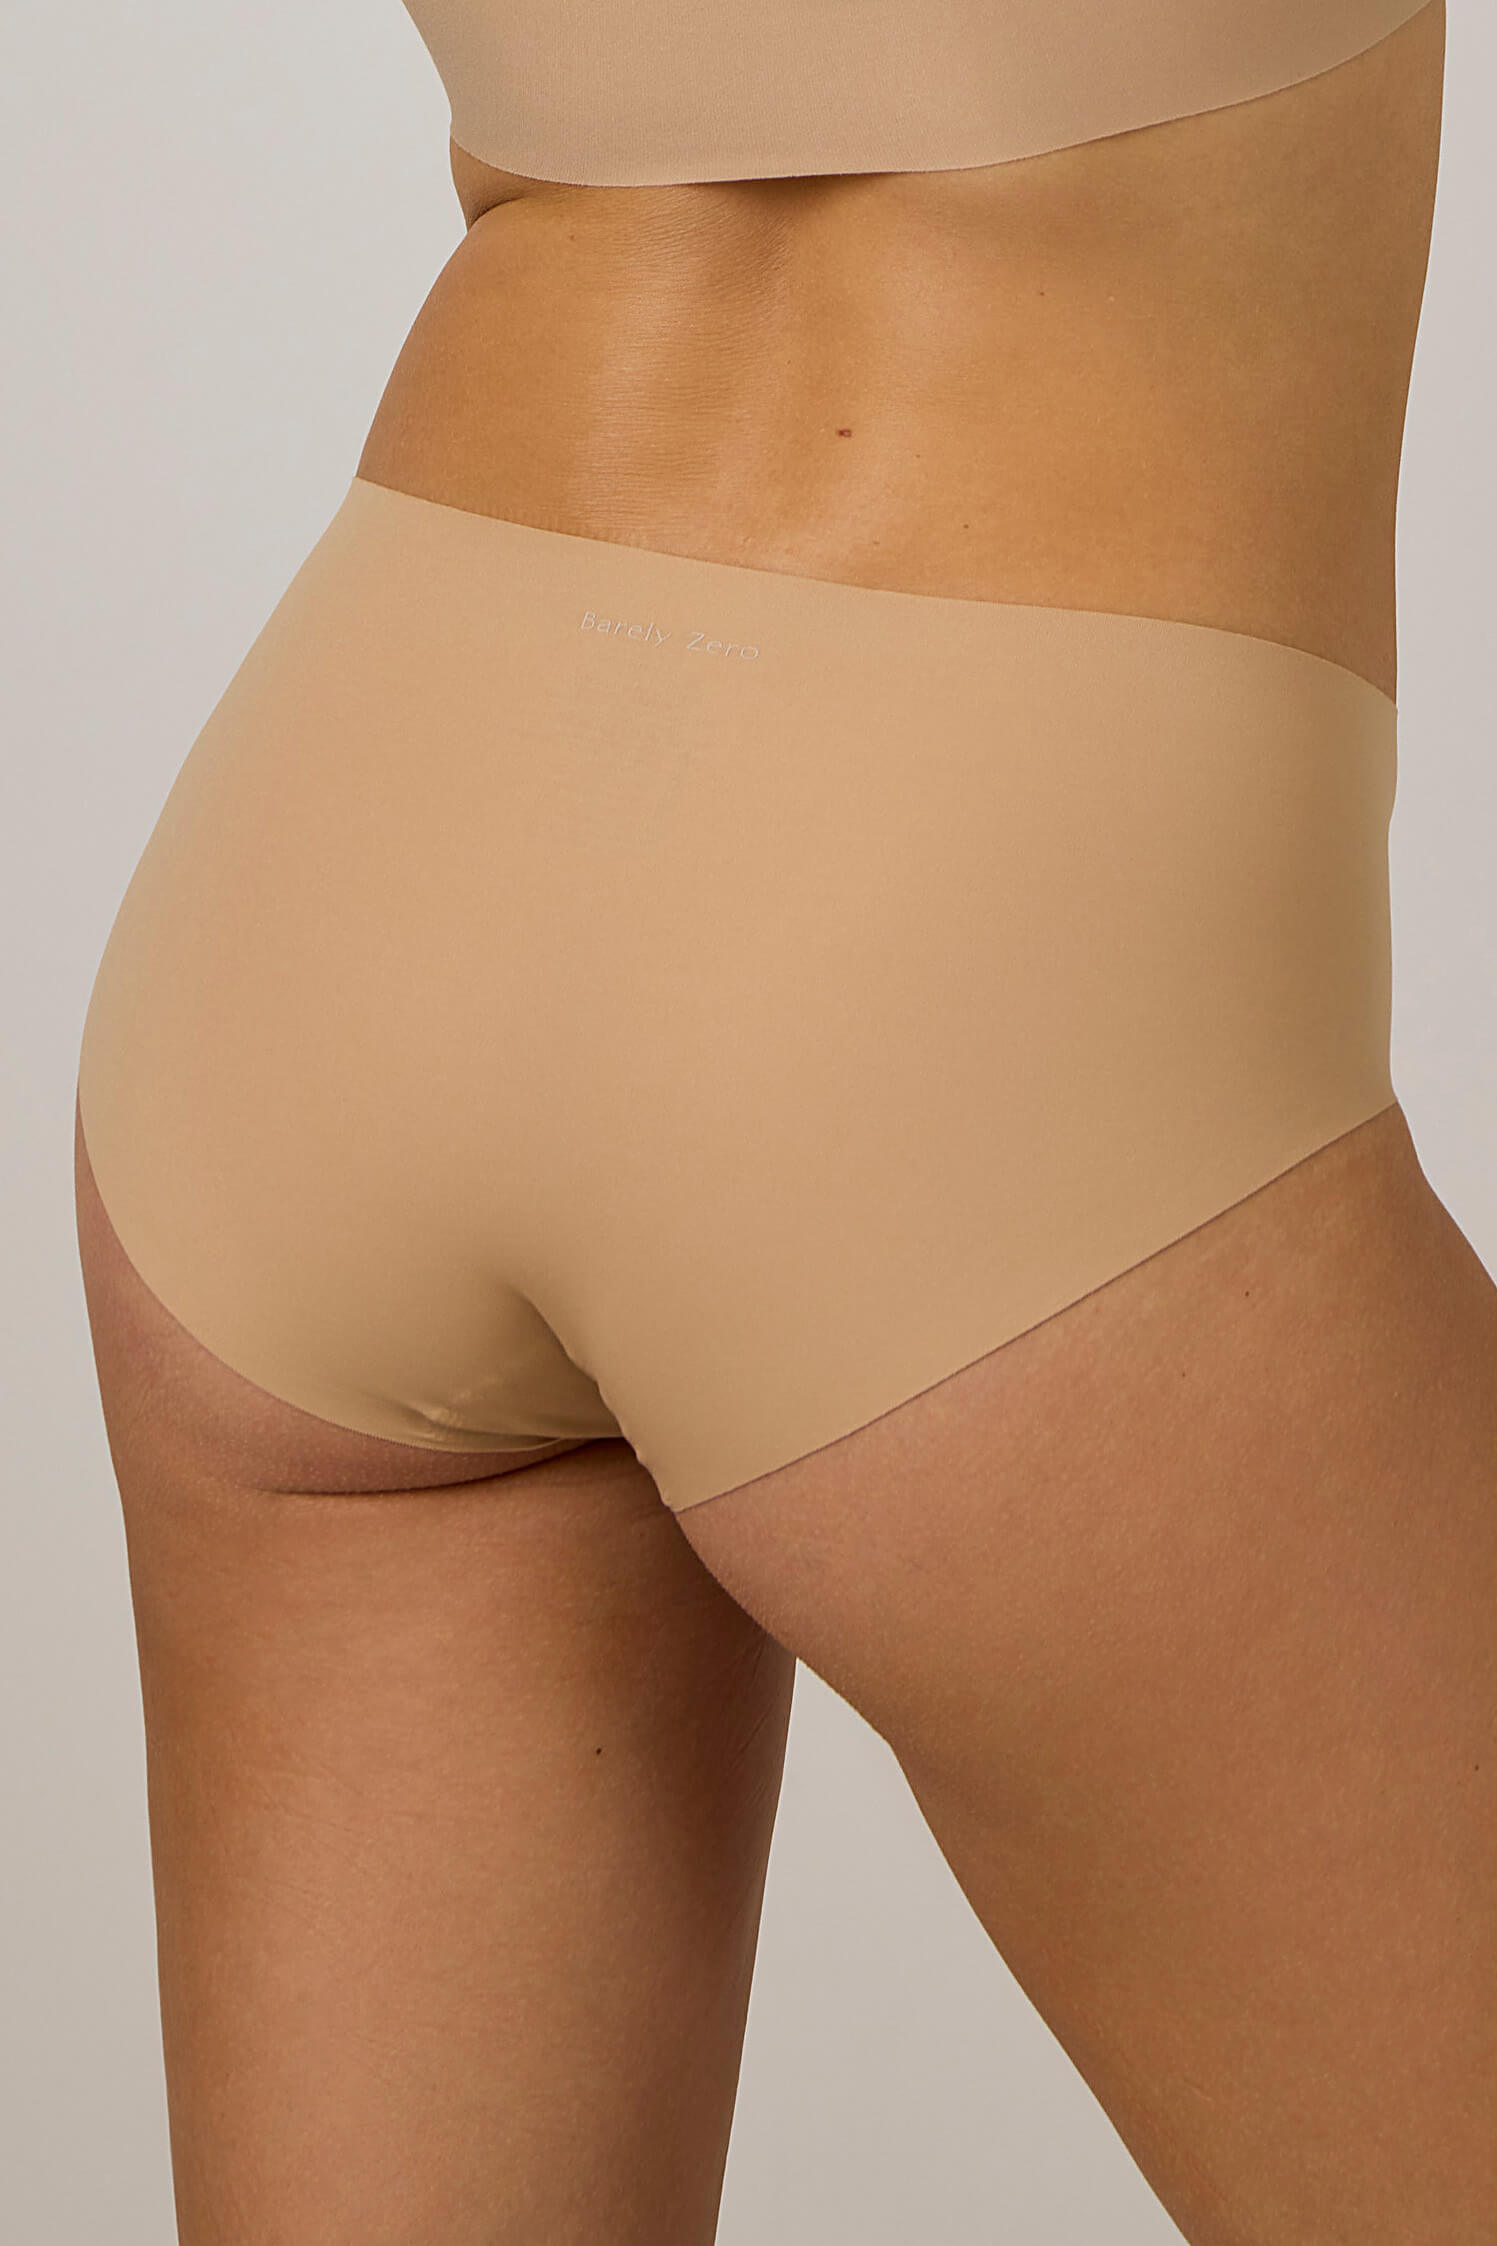 Women’s Adaptive Mid-rise Brief in Regular and Extended Sizing, Single